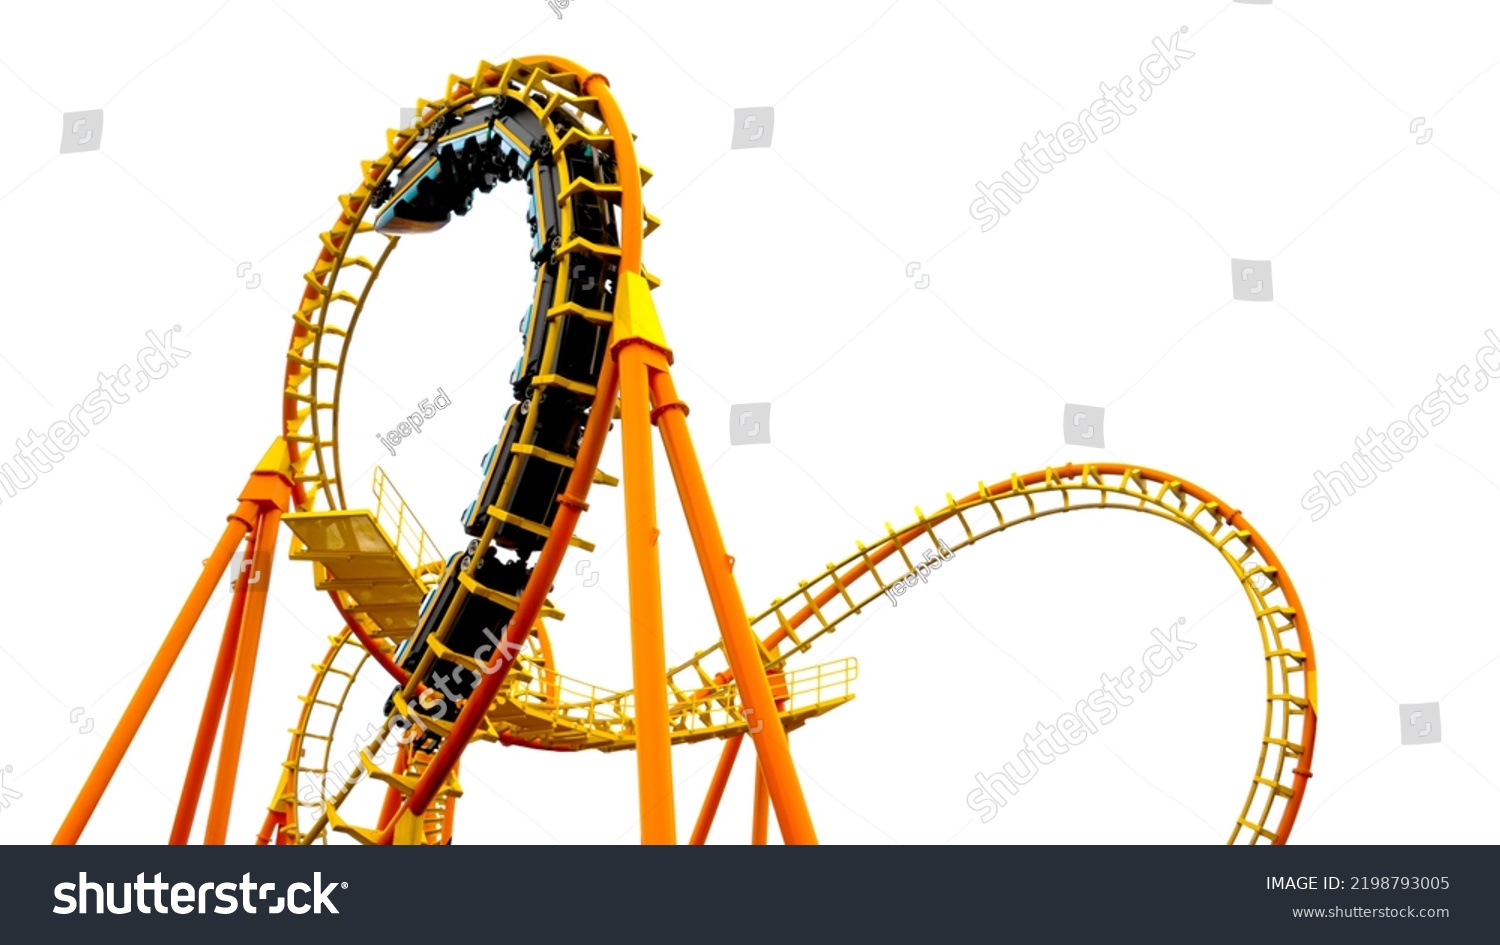 Roller coaster concept is related to business, joy or fear when playing high and fast rides, pieces of steel. #2198793005